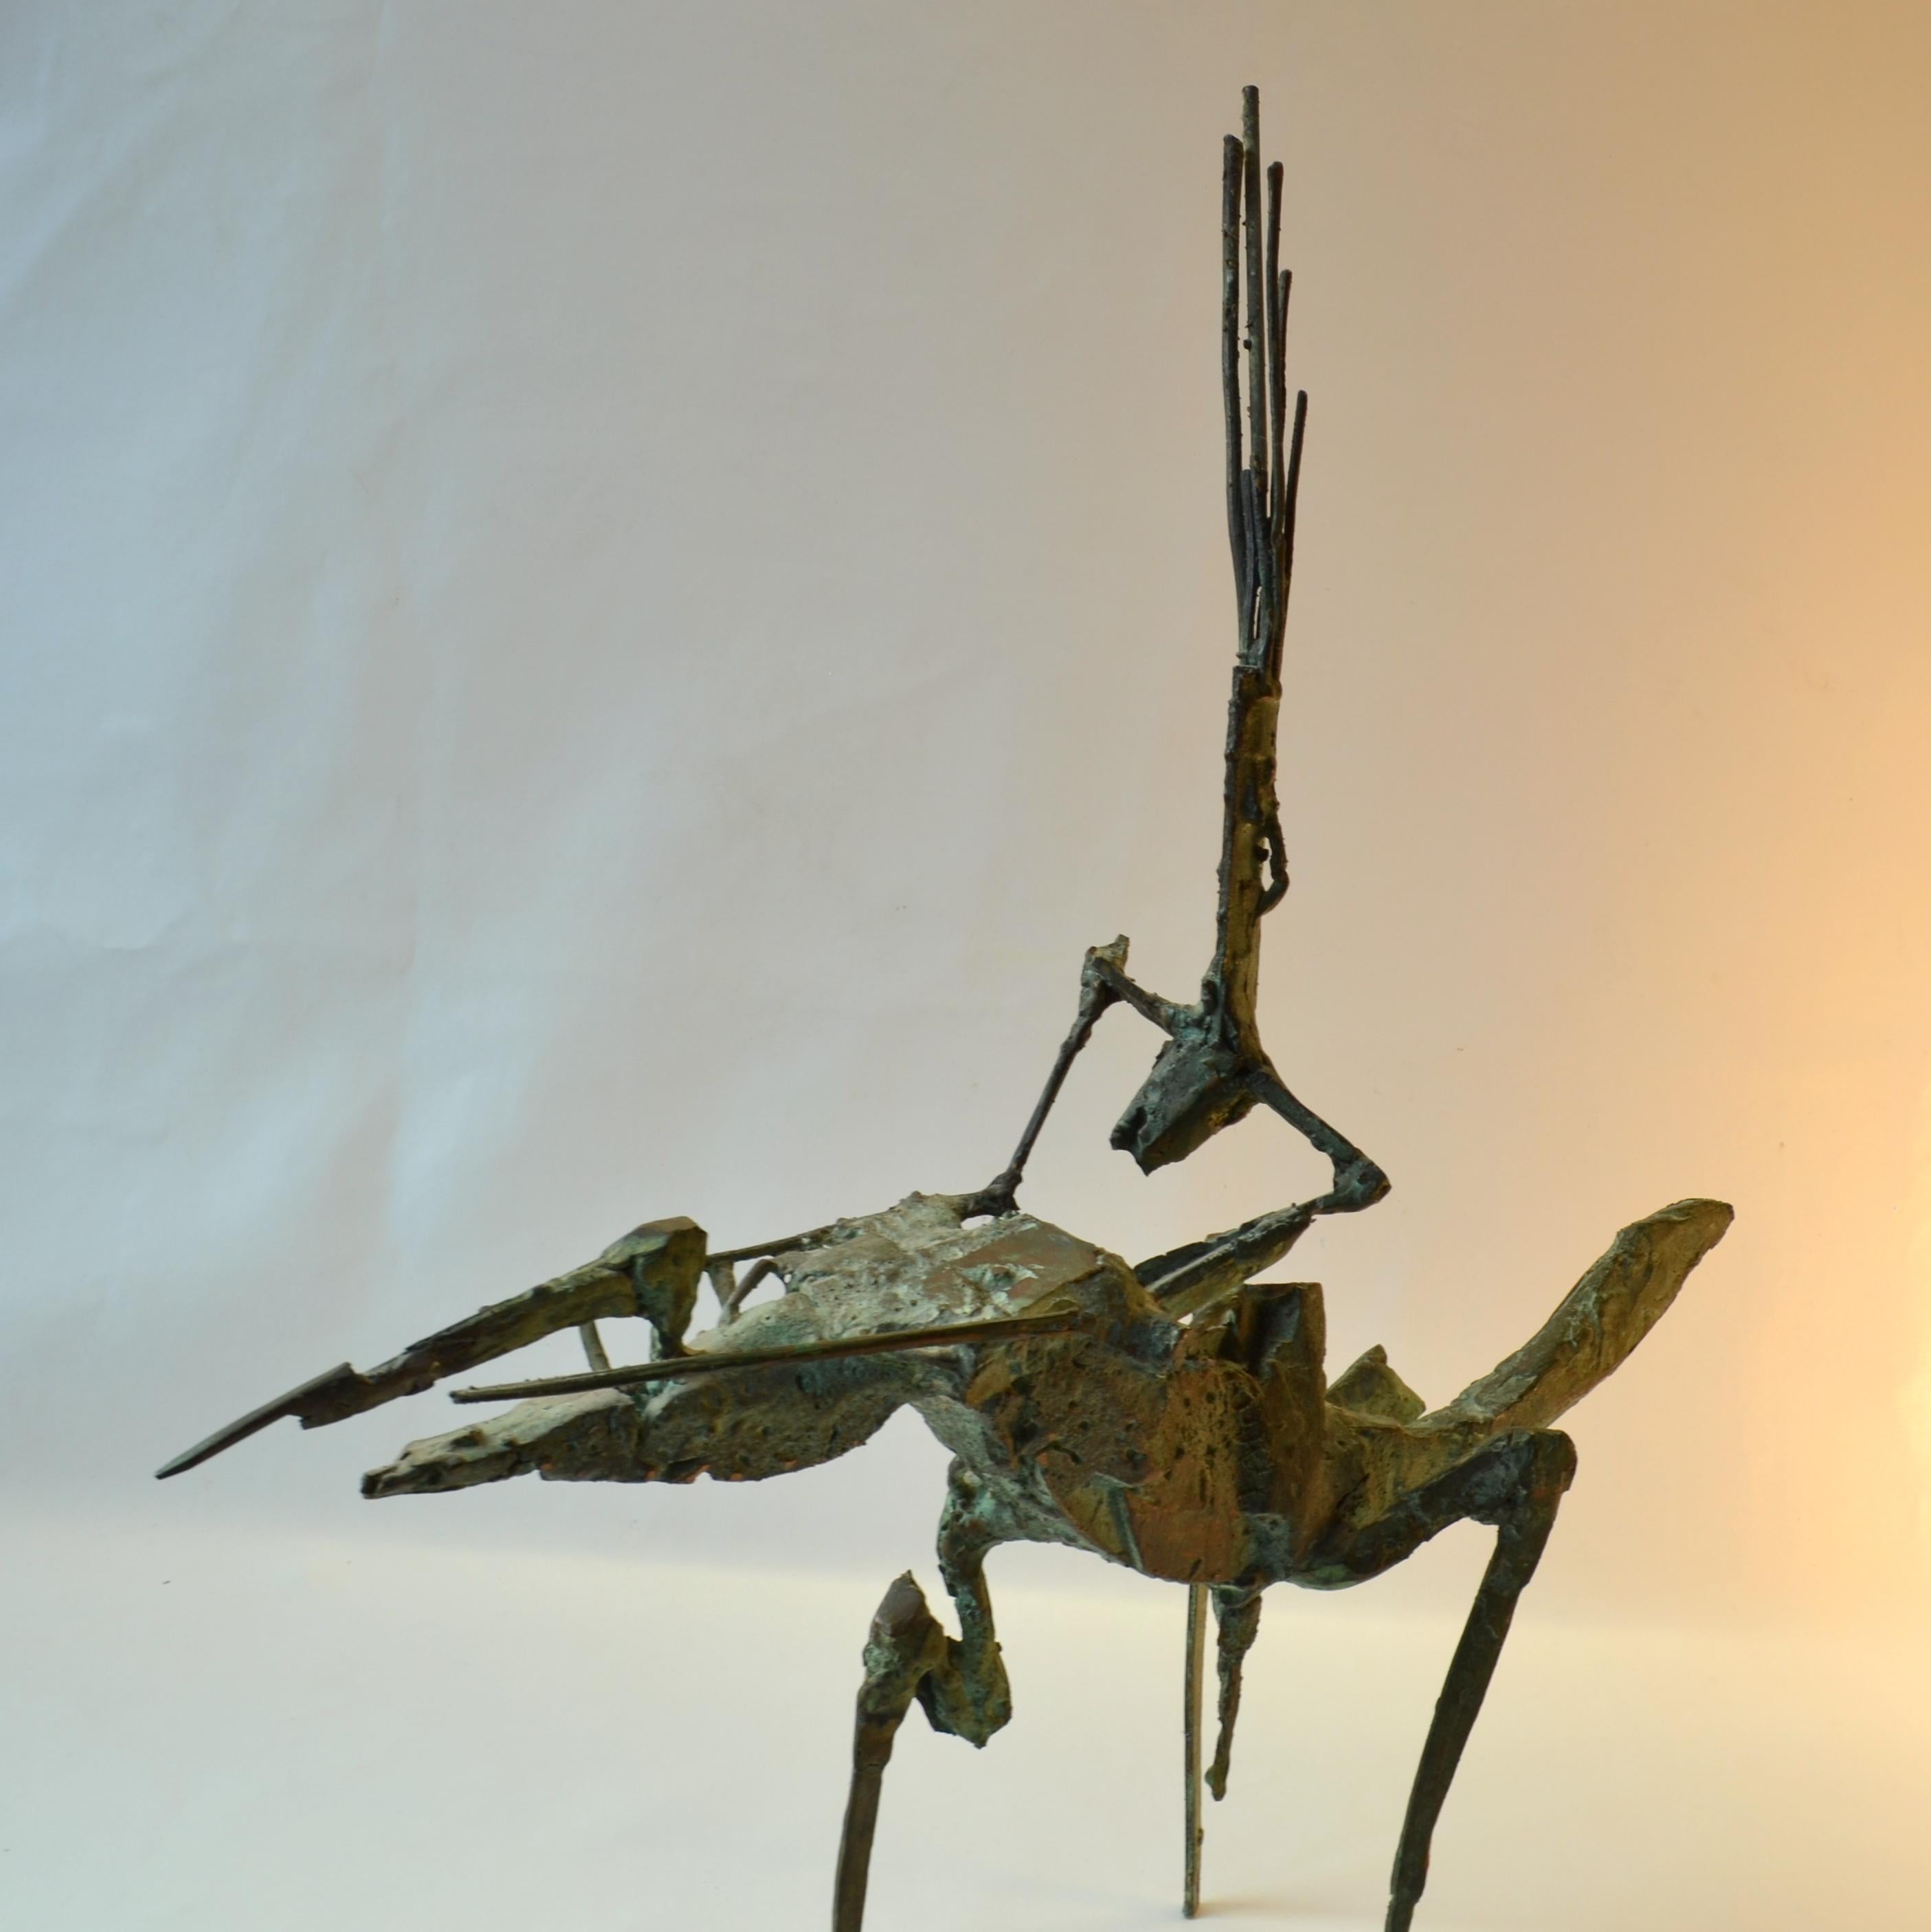 Brutalist almost futuristic bronze sculpture of acrobat in handstand on a horse by Dutch artist Jacobs, circa 1960-1970. The Dynamic sculpture has a grey-green patina adds to the surreal expression. The horse is free standing on 3 legs, very stable.